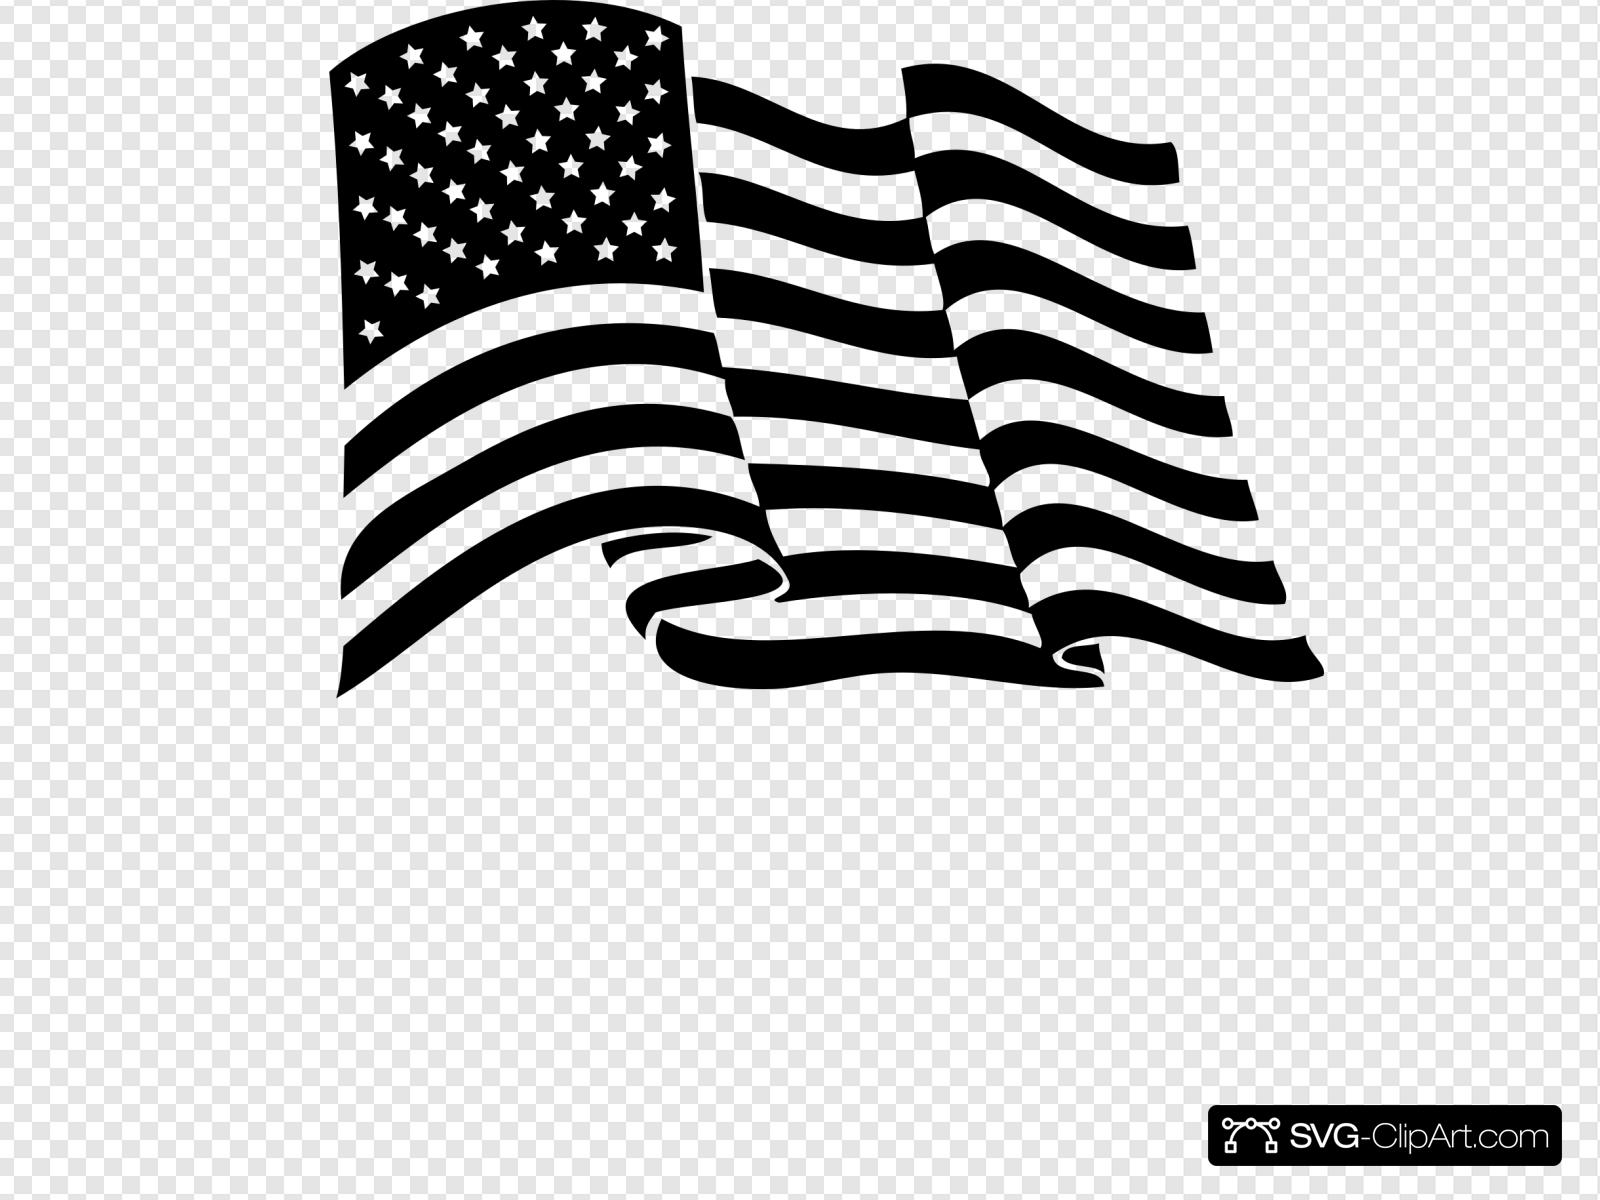 American Flag Clip art, Icon and SVG